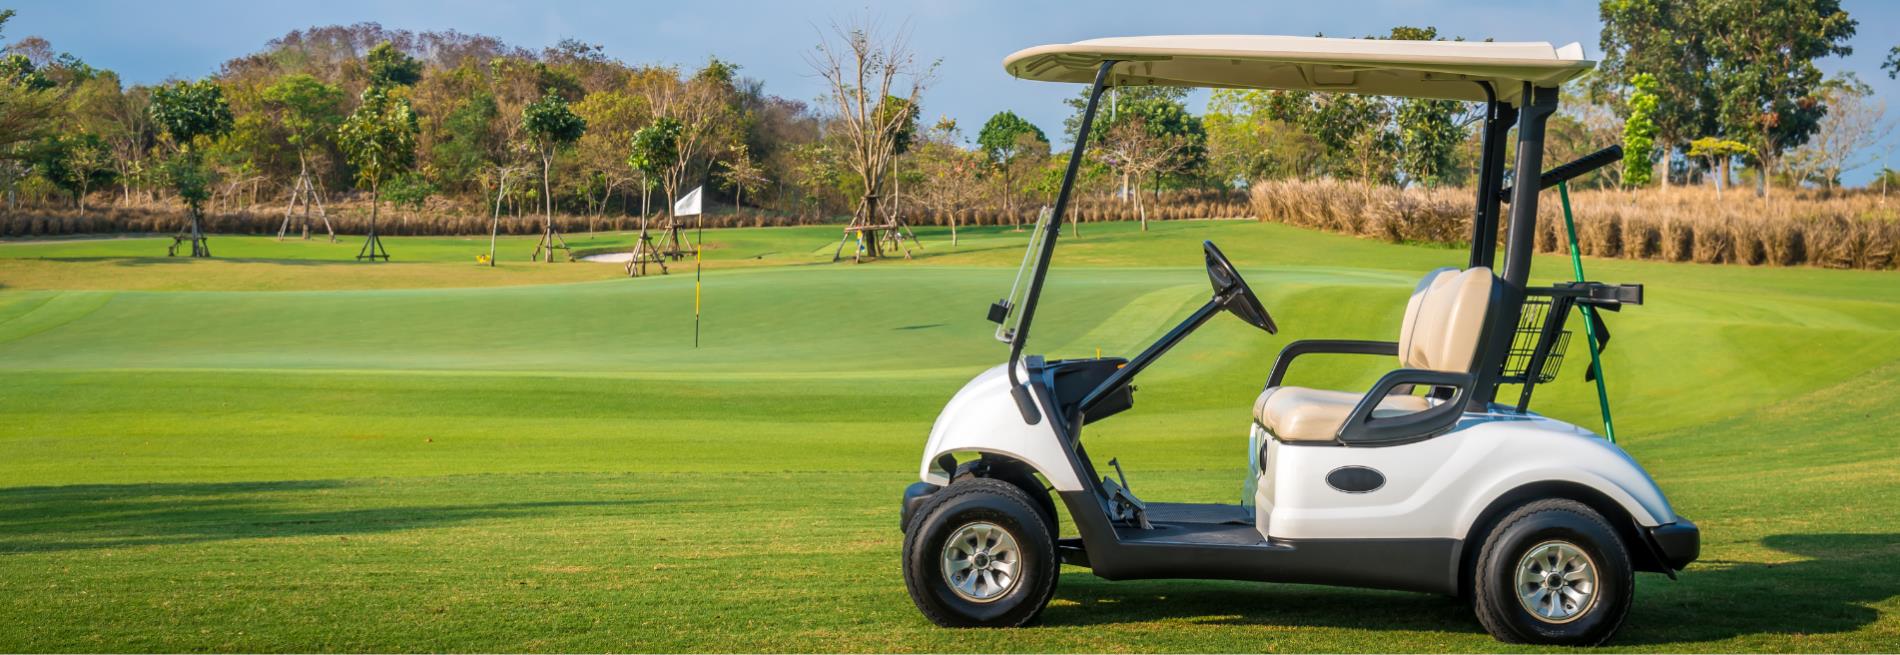 banner-golf-car-nuove-usate-maggio-000.png